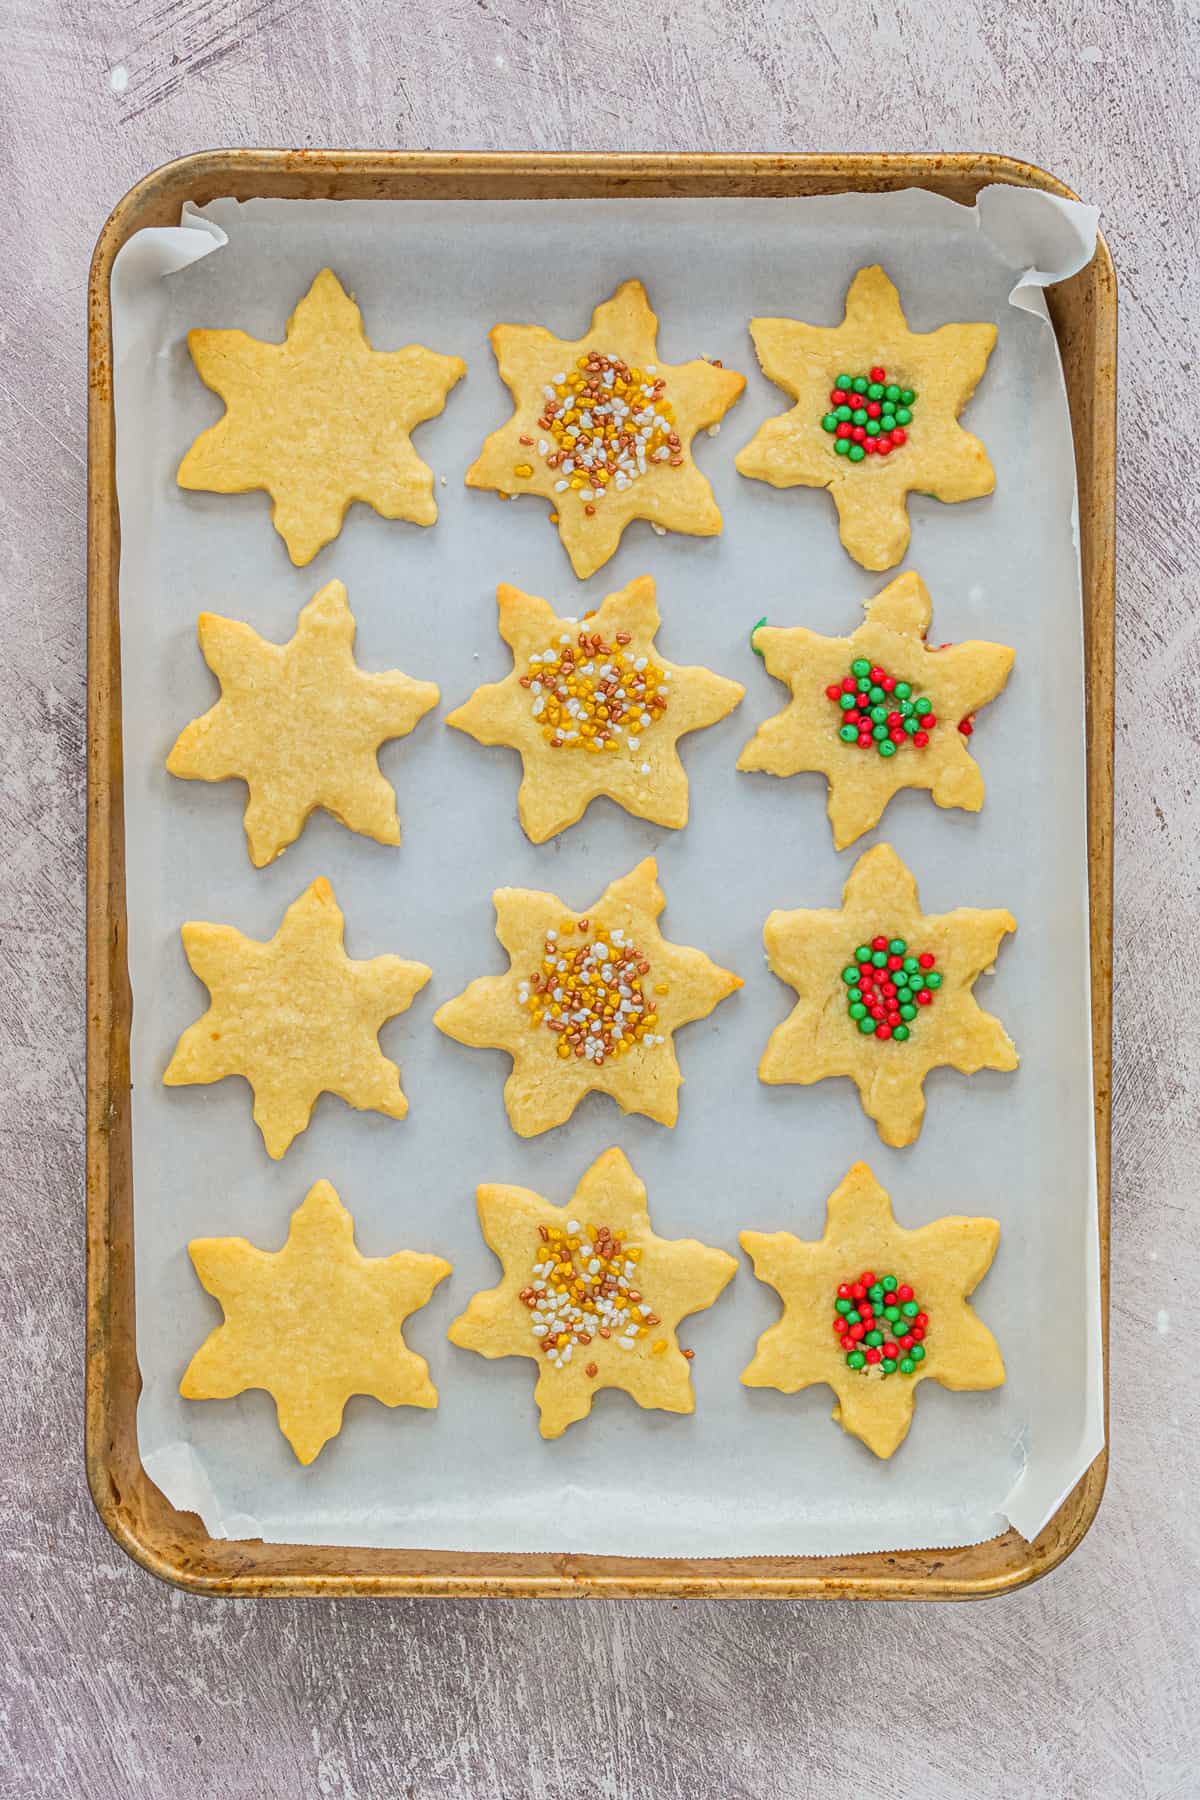 Snowflake Shortbread Cookies on lined baking sheet. Some are topped with sprinkles, others are plain